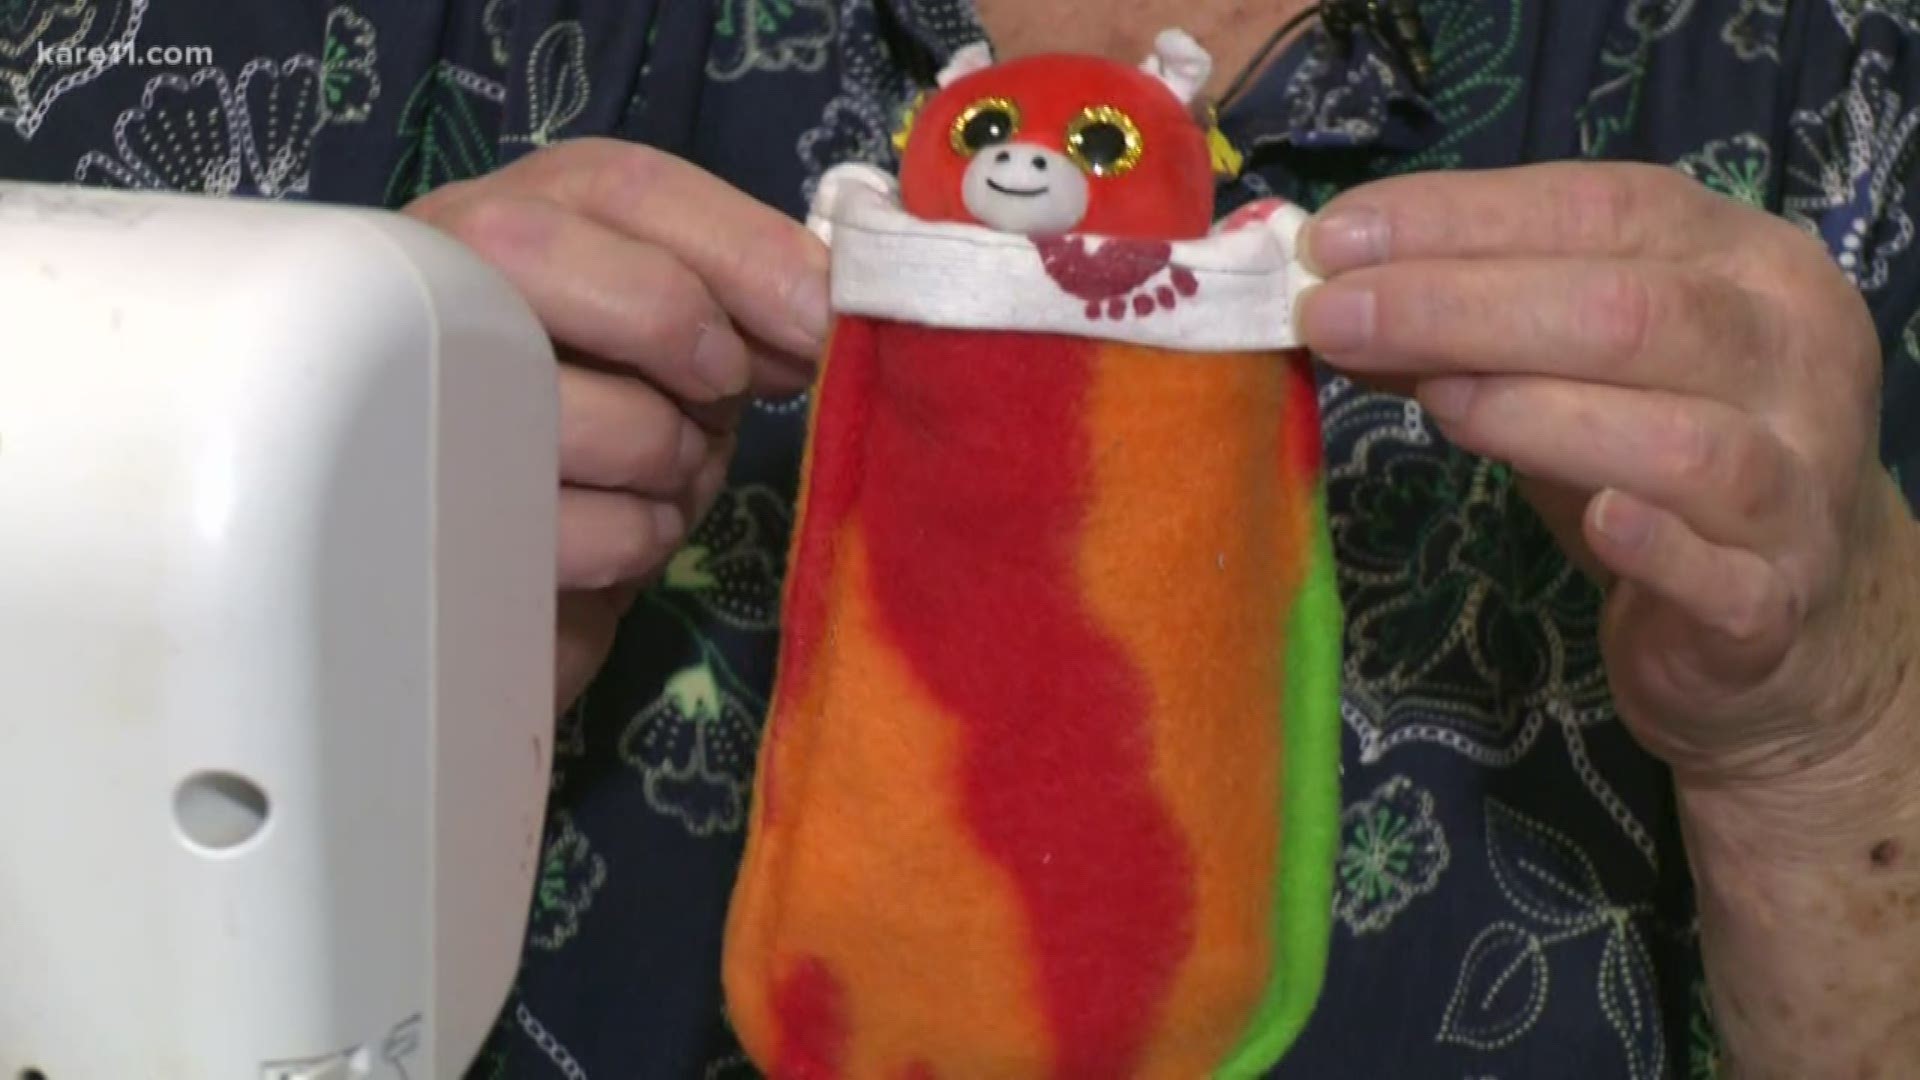 Volunteers are coming together to craft items for animals affected by the fires in Australia.